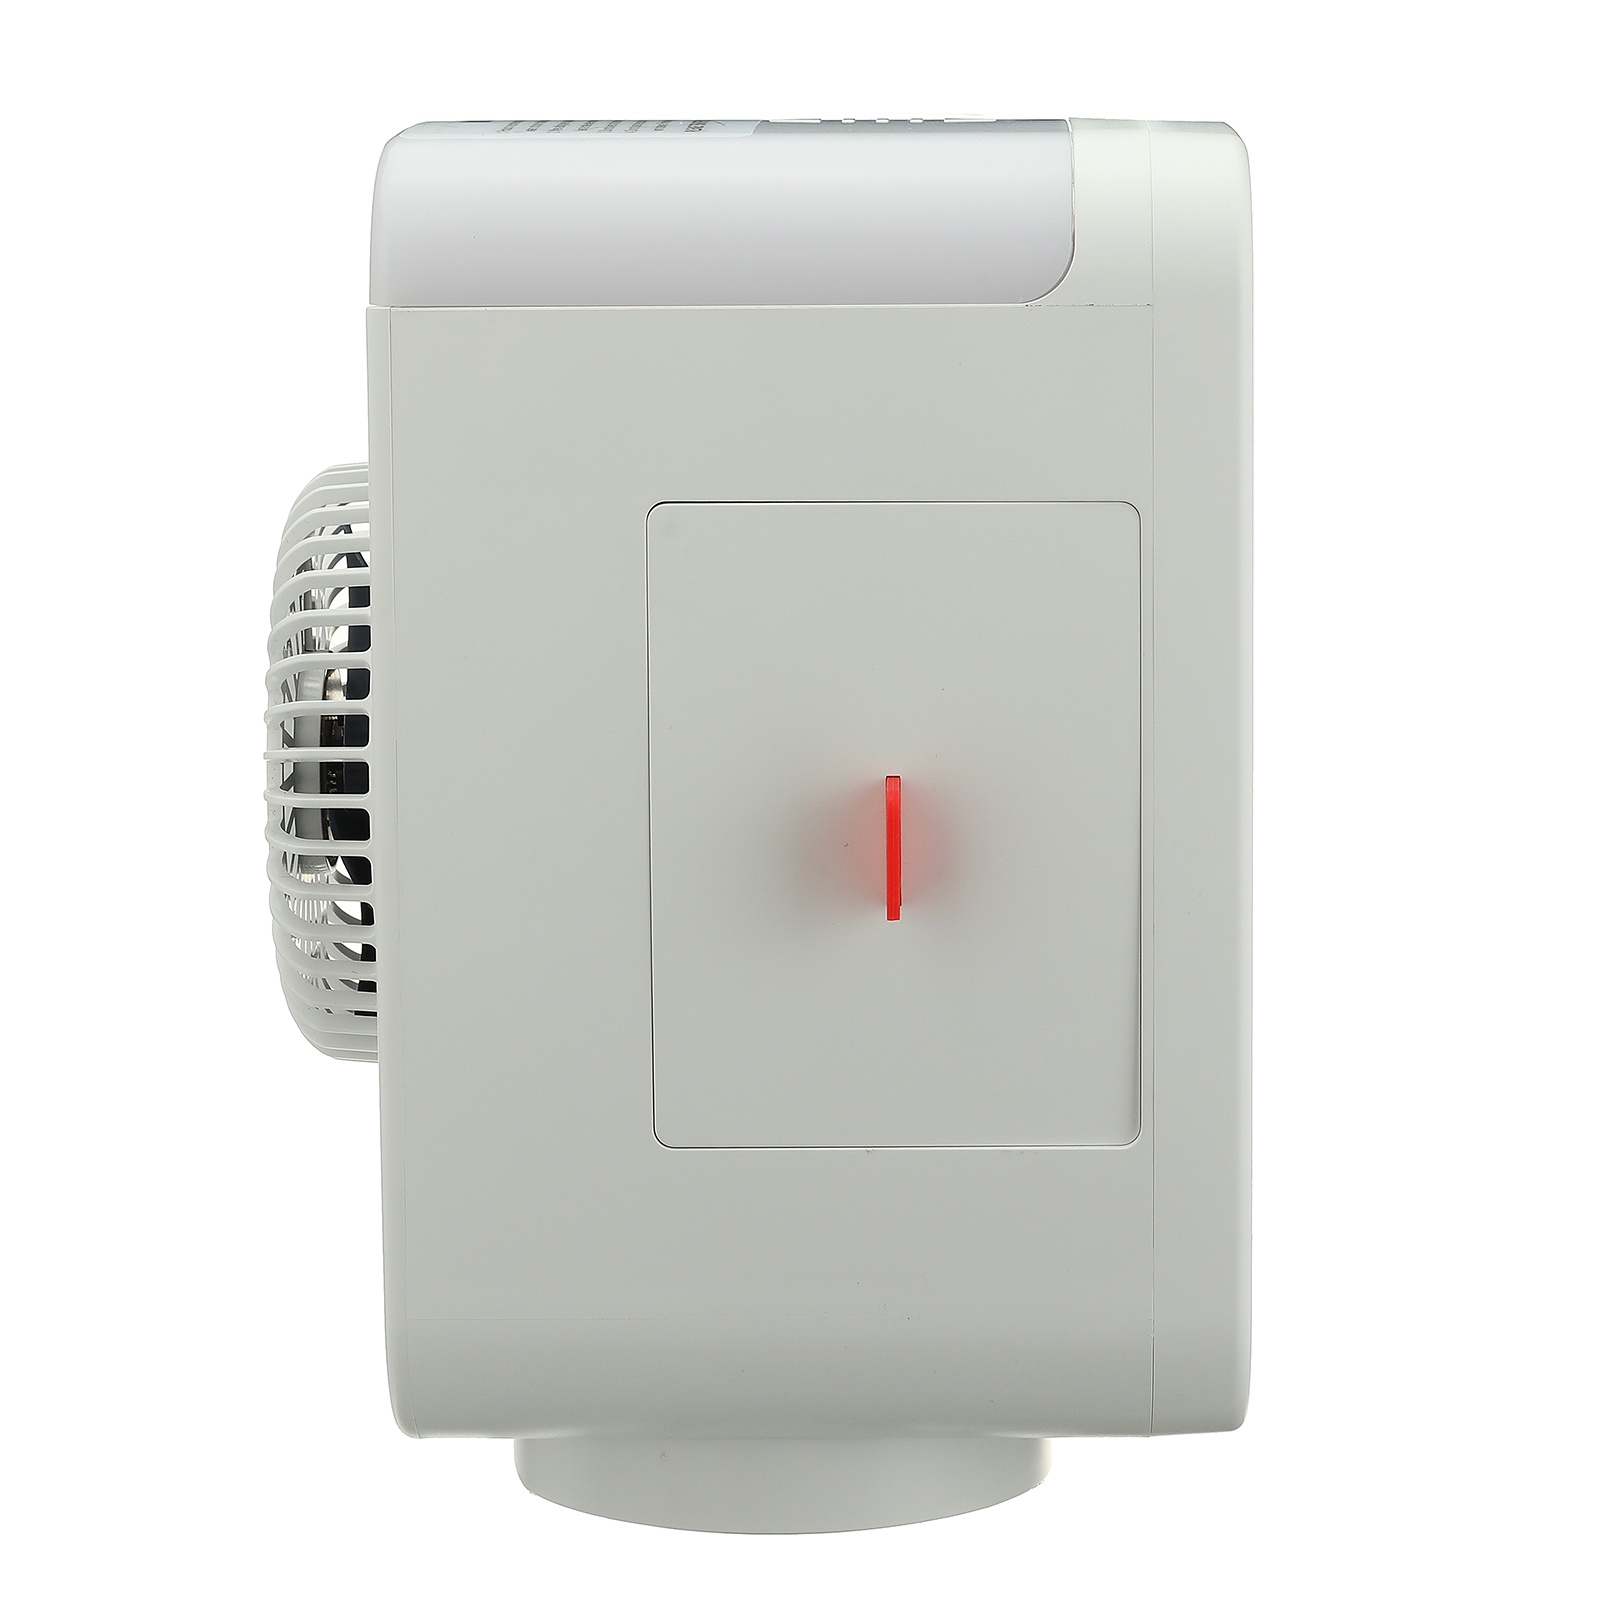 5-in-1-Mini-Air-Cooler-3-Wind-Speed-Adjustment-120deg-Wide-Angle-Rotation-Air-Humidification-Conditi-1885105-20